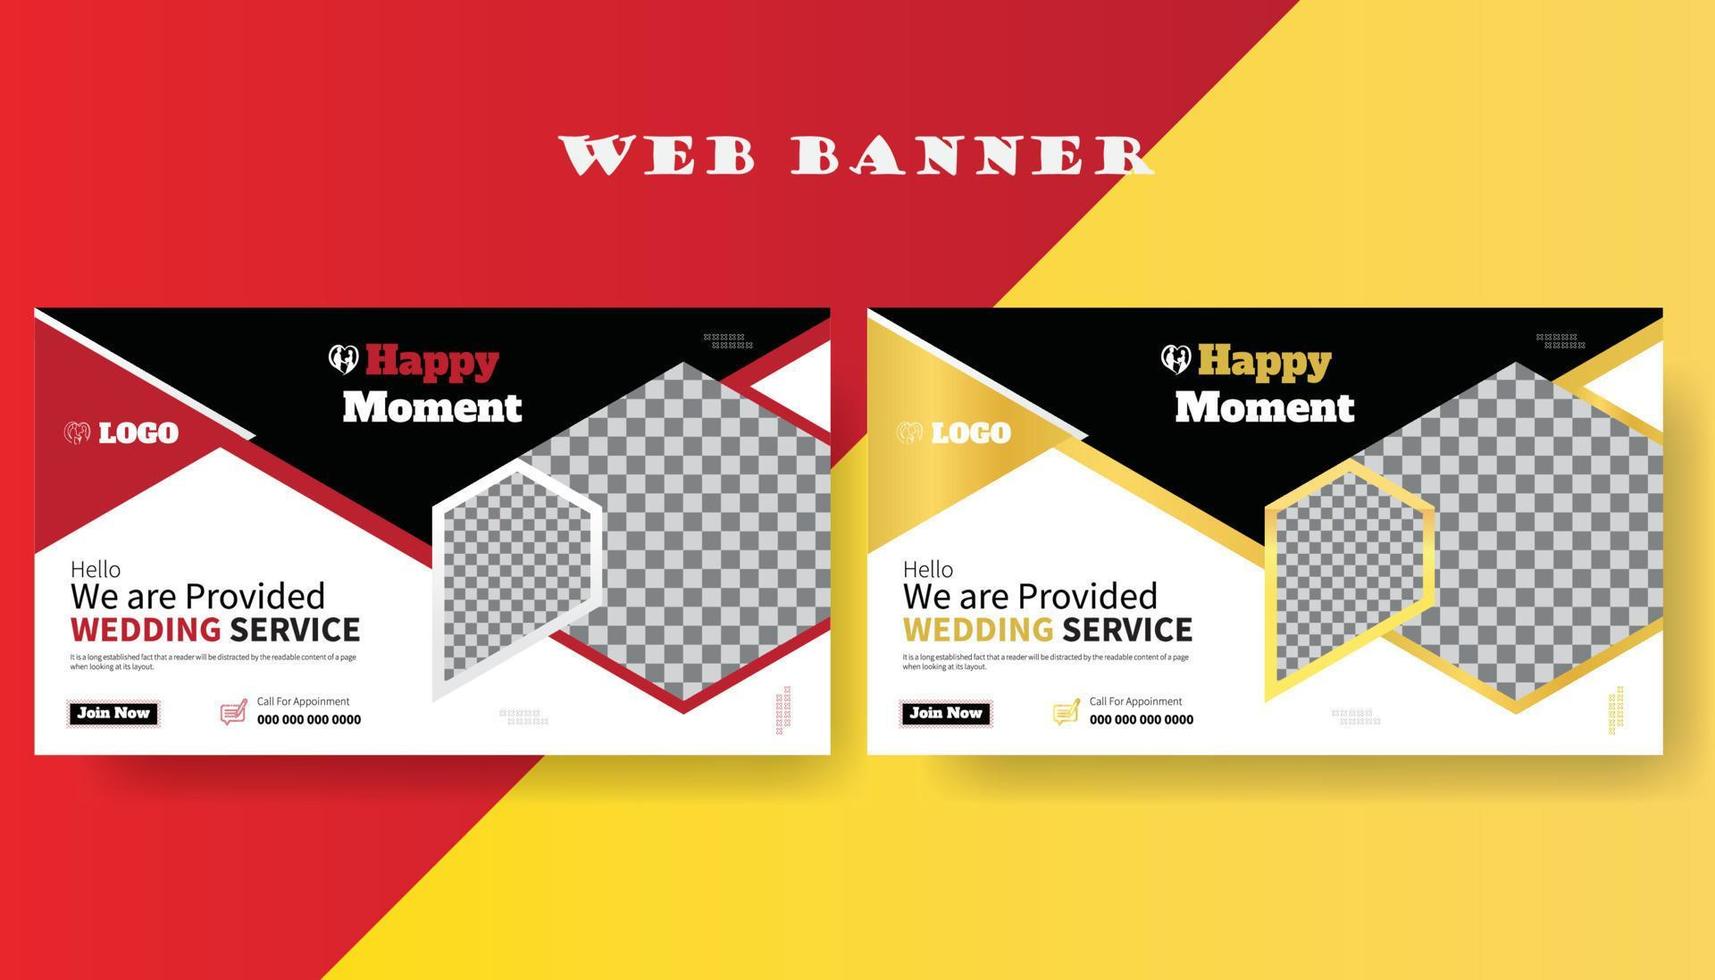 Wedding Service, youtube thumbnail and web banner, Corporate Marketing web banner for web, horizontal banner template design. Modern banner design with black and white background and Red frame shape vector